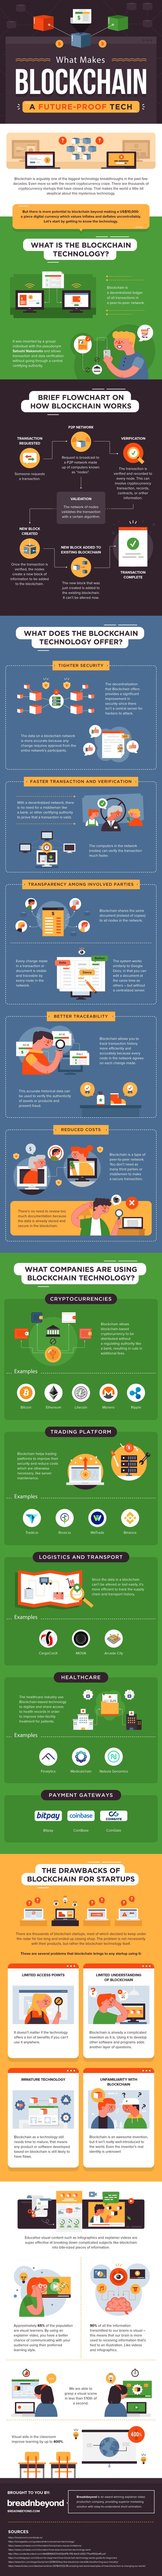 [Infographic] The Visual Guide to Blockchain Beyond Cryptocurrency